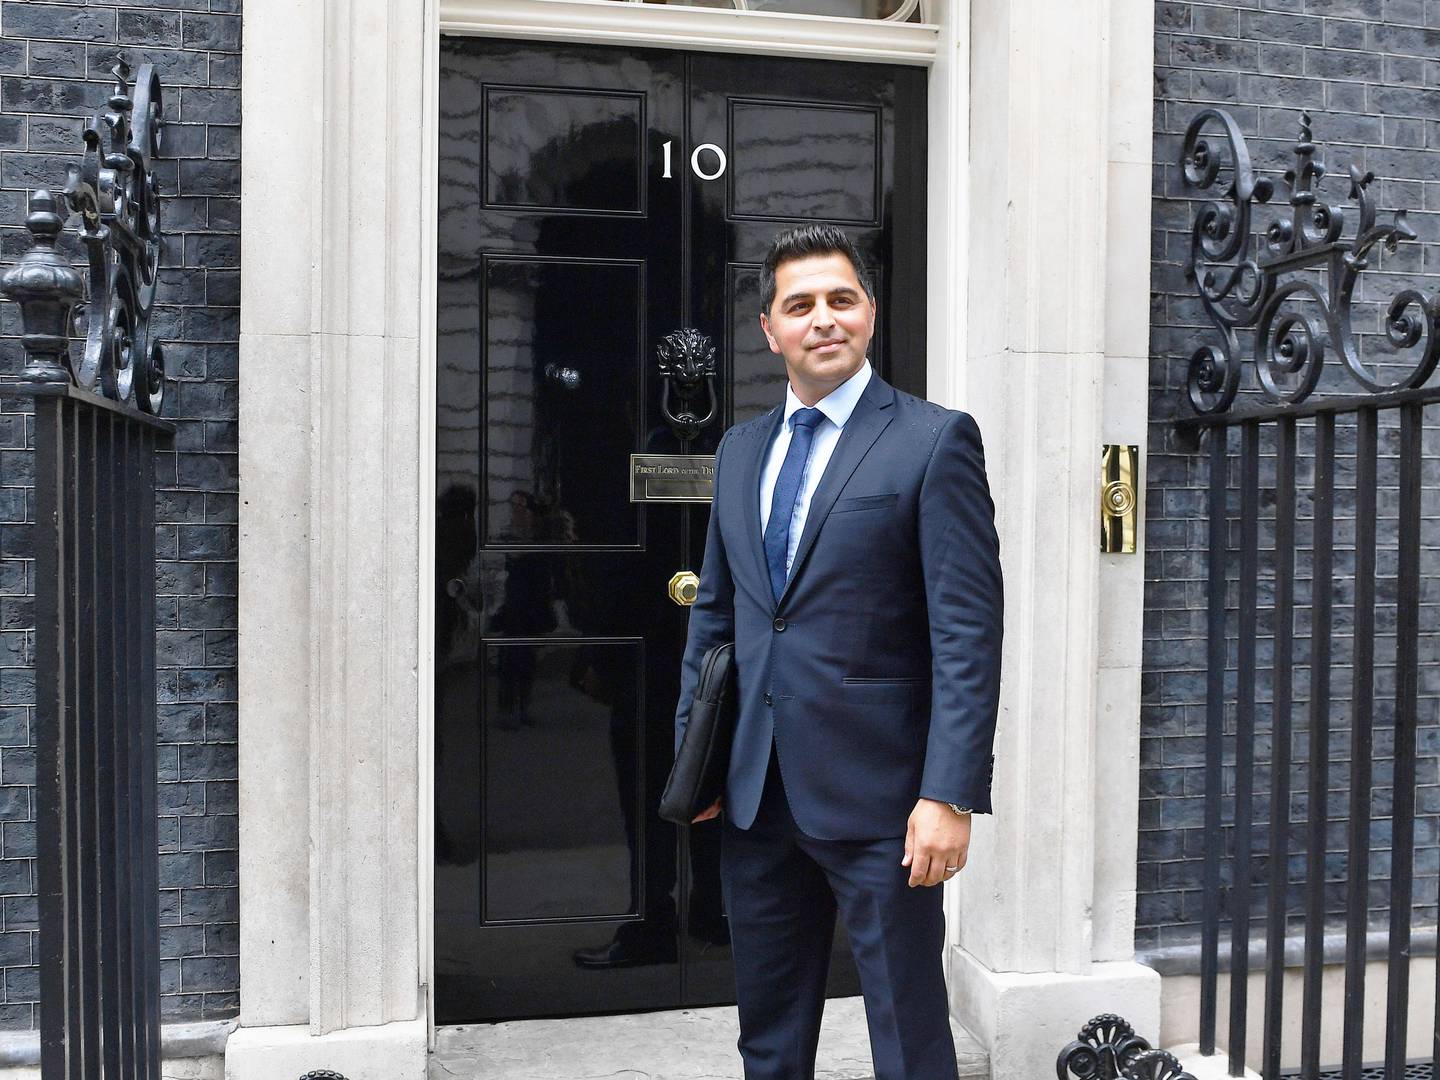 Dr Waheed Arian, an emergency medicine and radiology specialist, arrives at No 10 Downing Street in London for the 70th anniversary of the NHS reception. John Stillwell / Getty